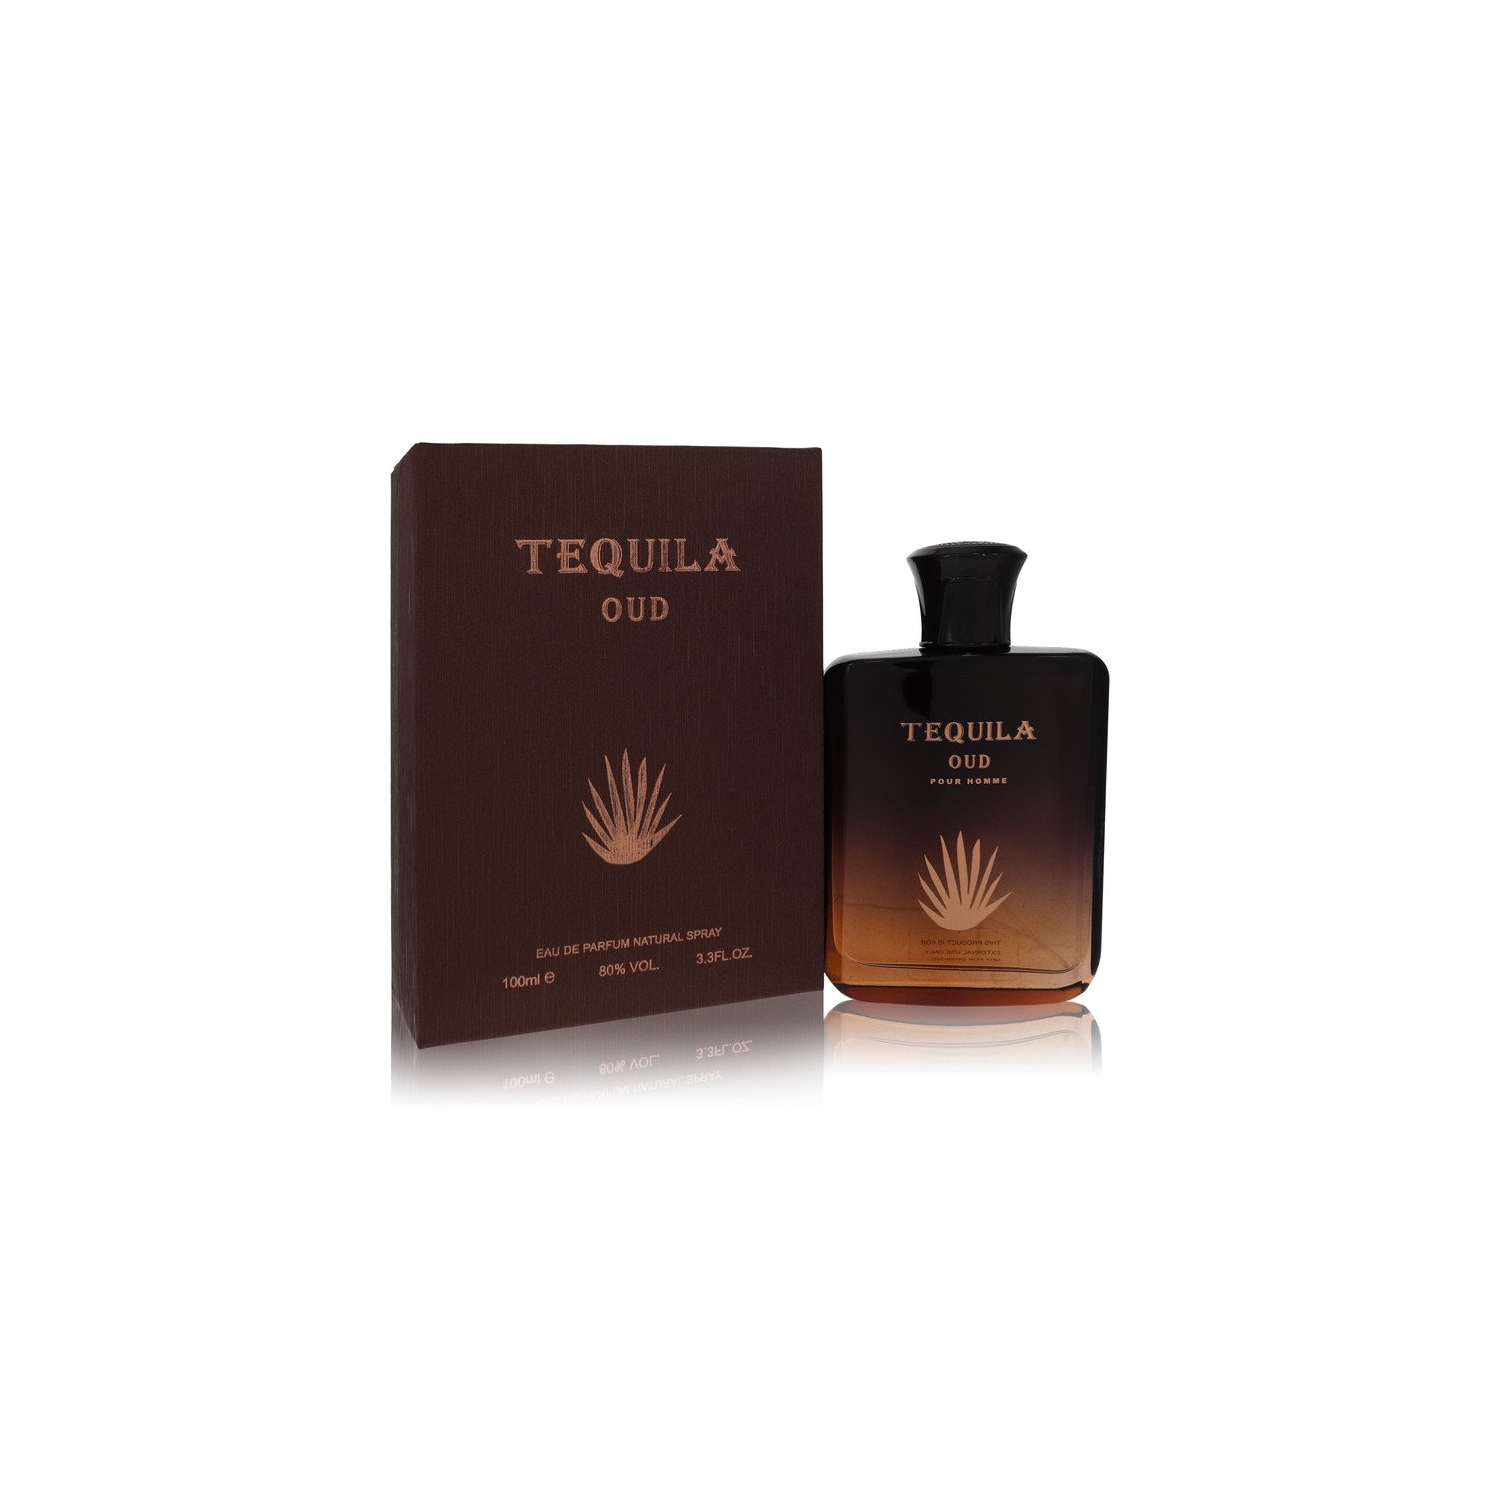 Tequila Oud by Tequila Perfumes